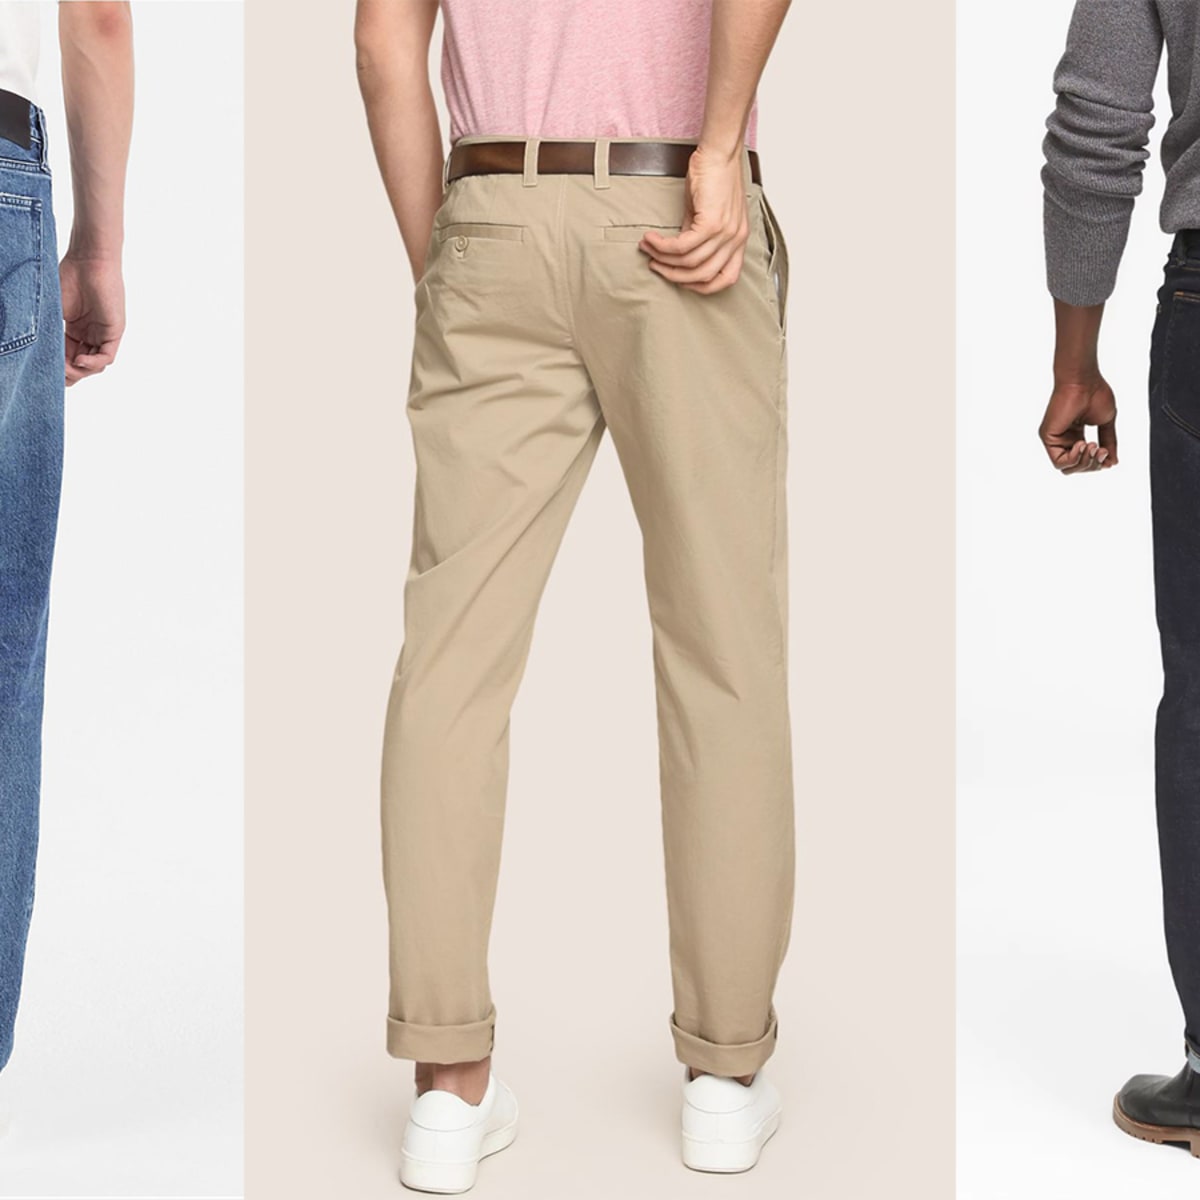 The Best Mens Clothes According to Women on Reddit  Mens Health